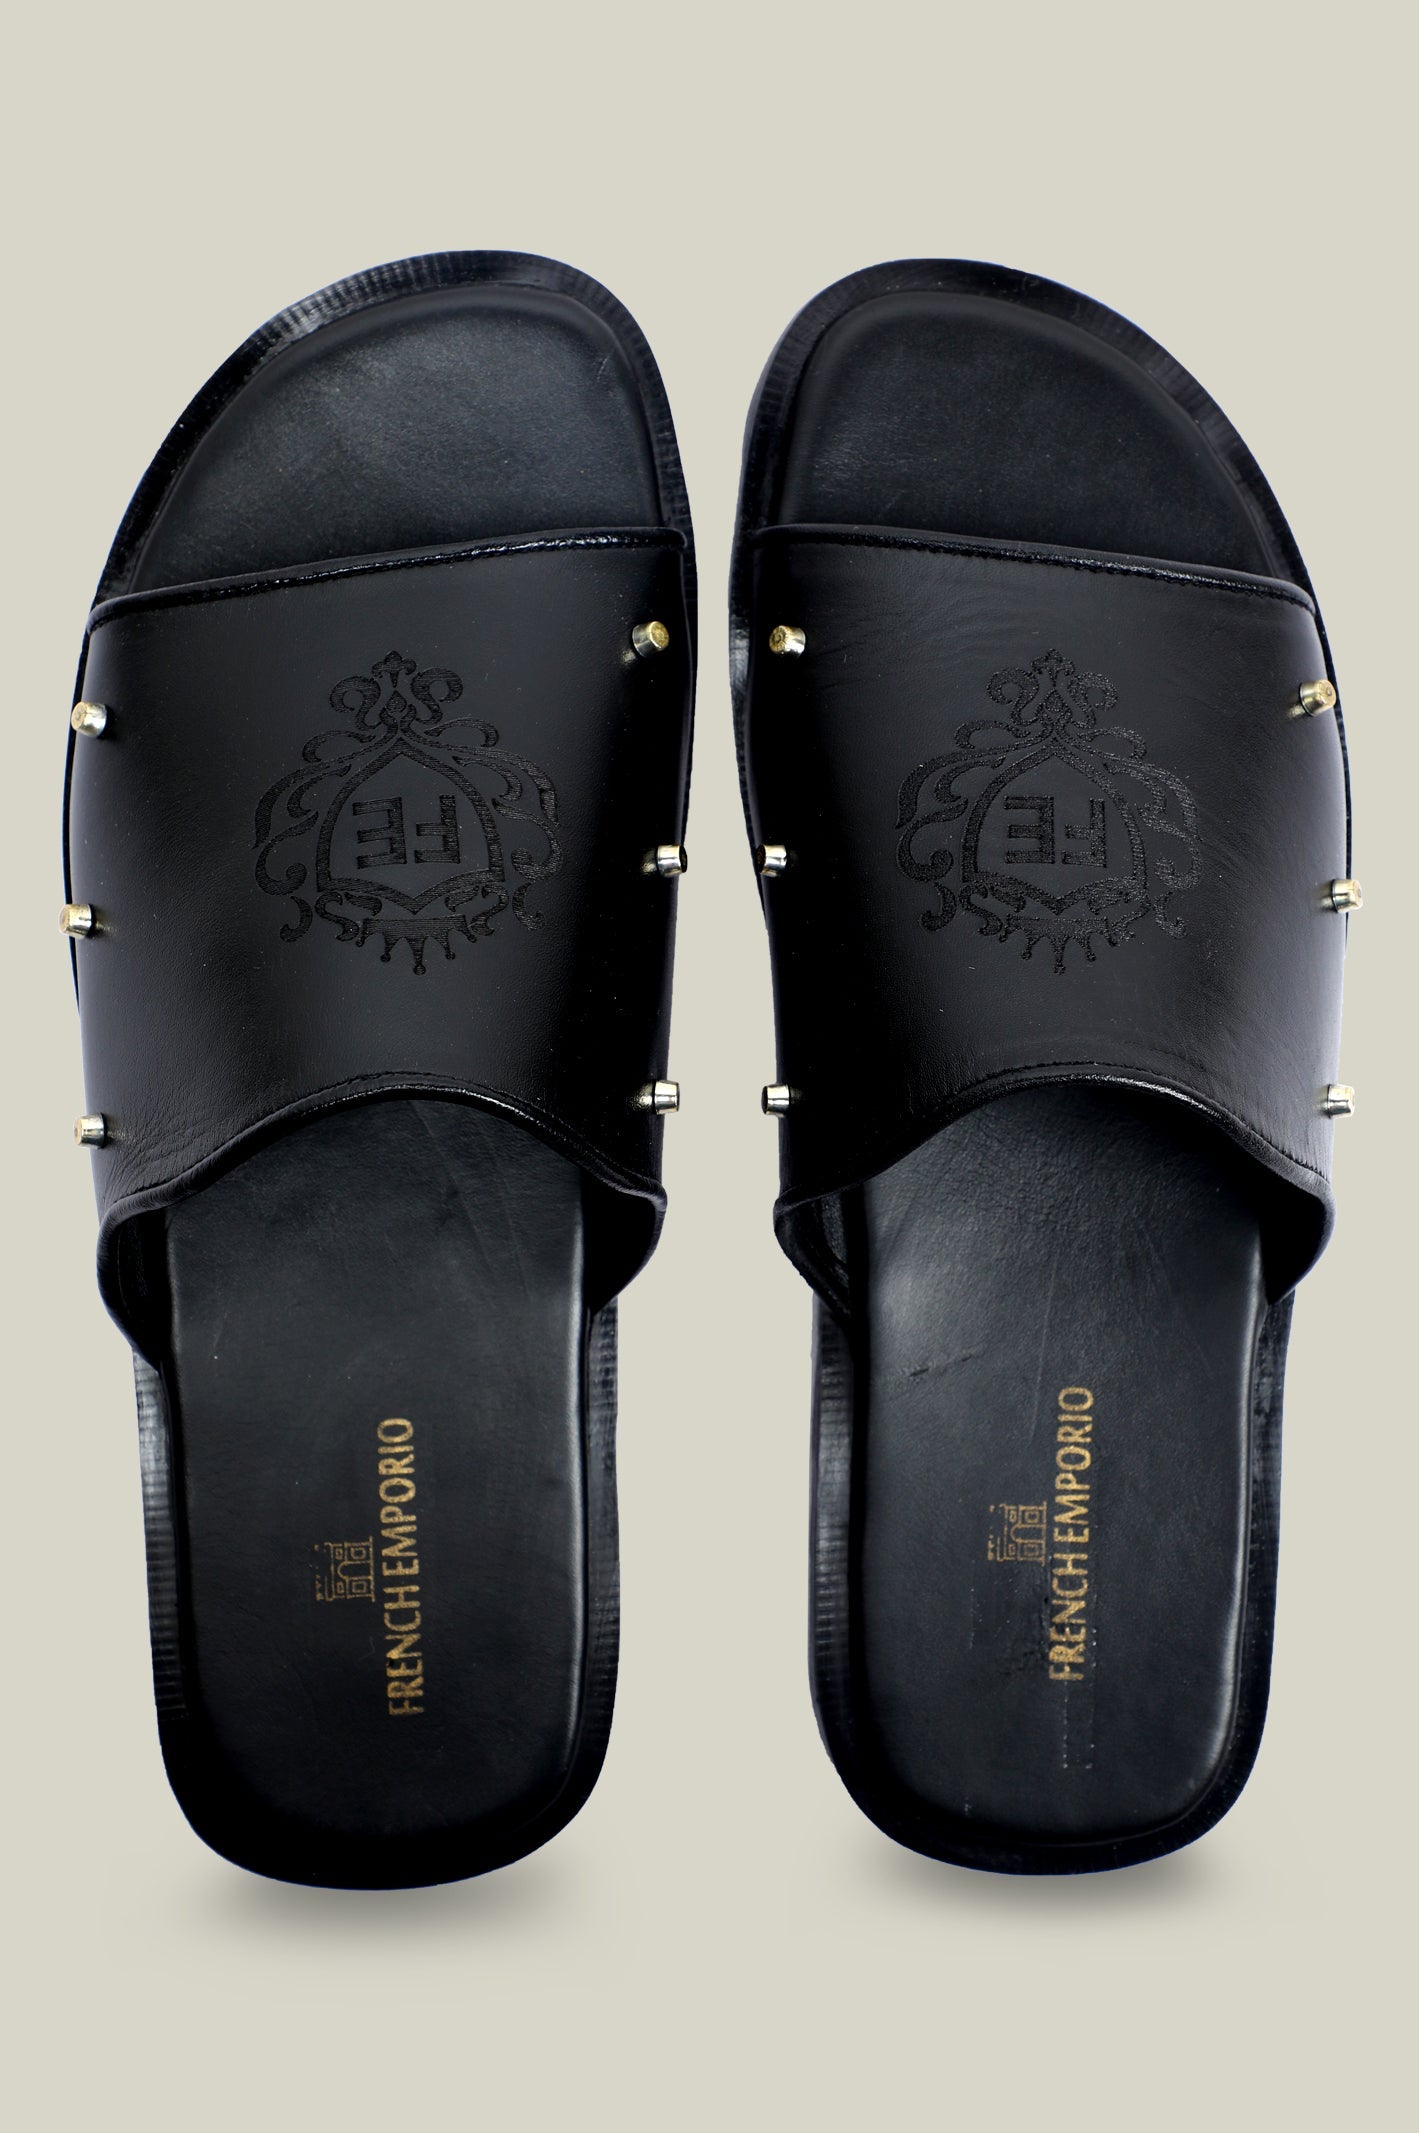 Slippers For Men in Black - Diners